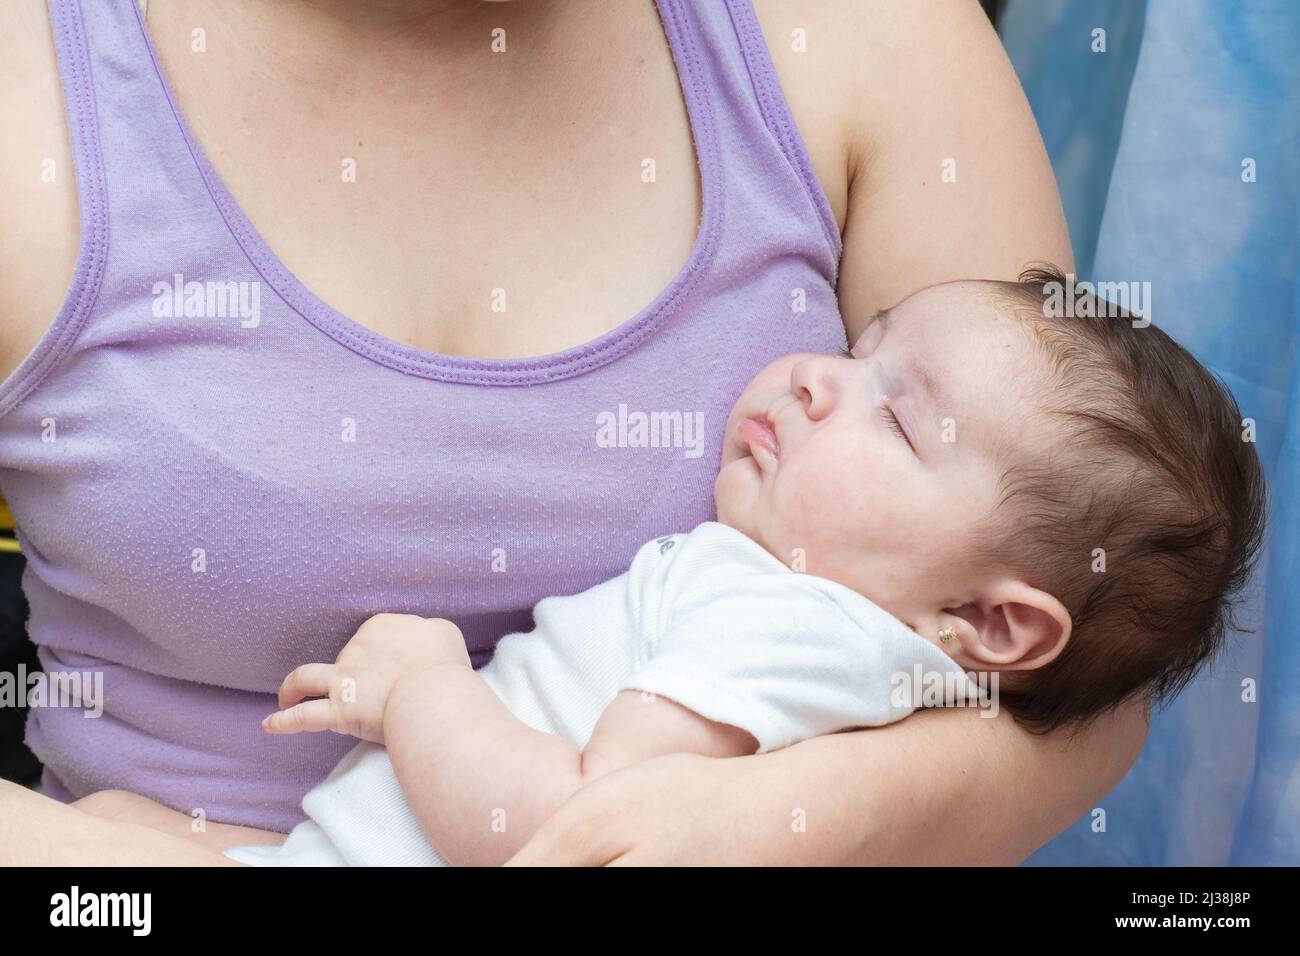 beautiful two month old latina baby girl sleeping on her mother's arms. cute baby girl dressed in a white jumpsuit clinging to her mother's chest as s Stock Photo